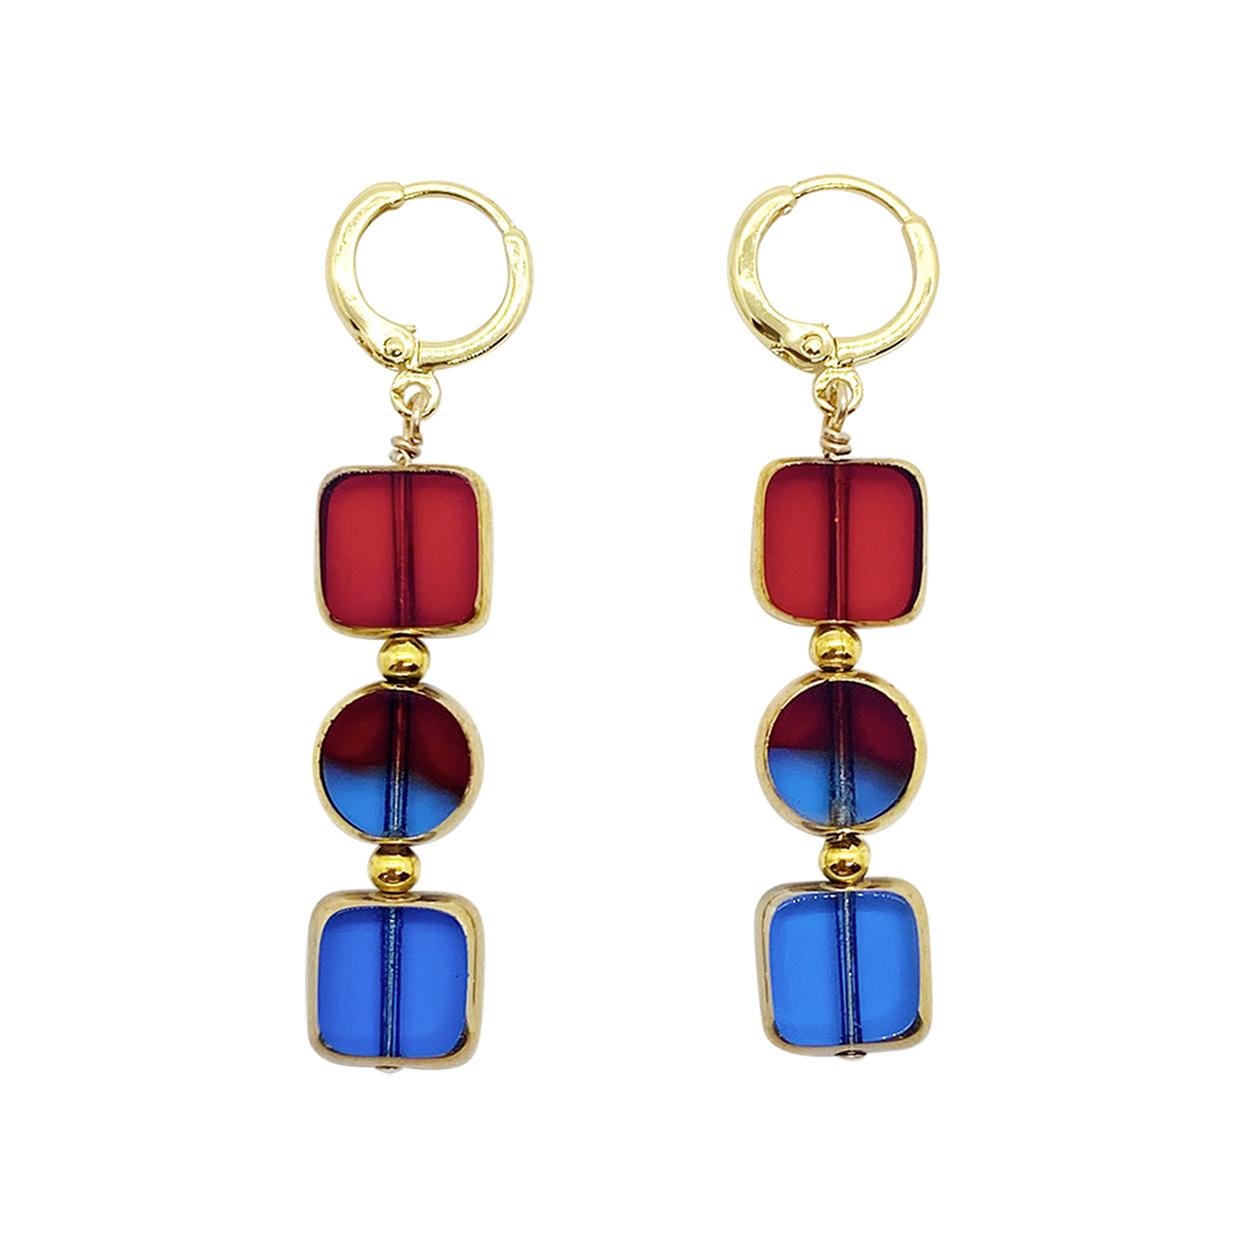 Blue & Red Translucent German Beads edged with 24K Gold For Sale